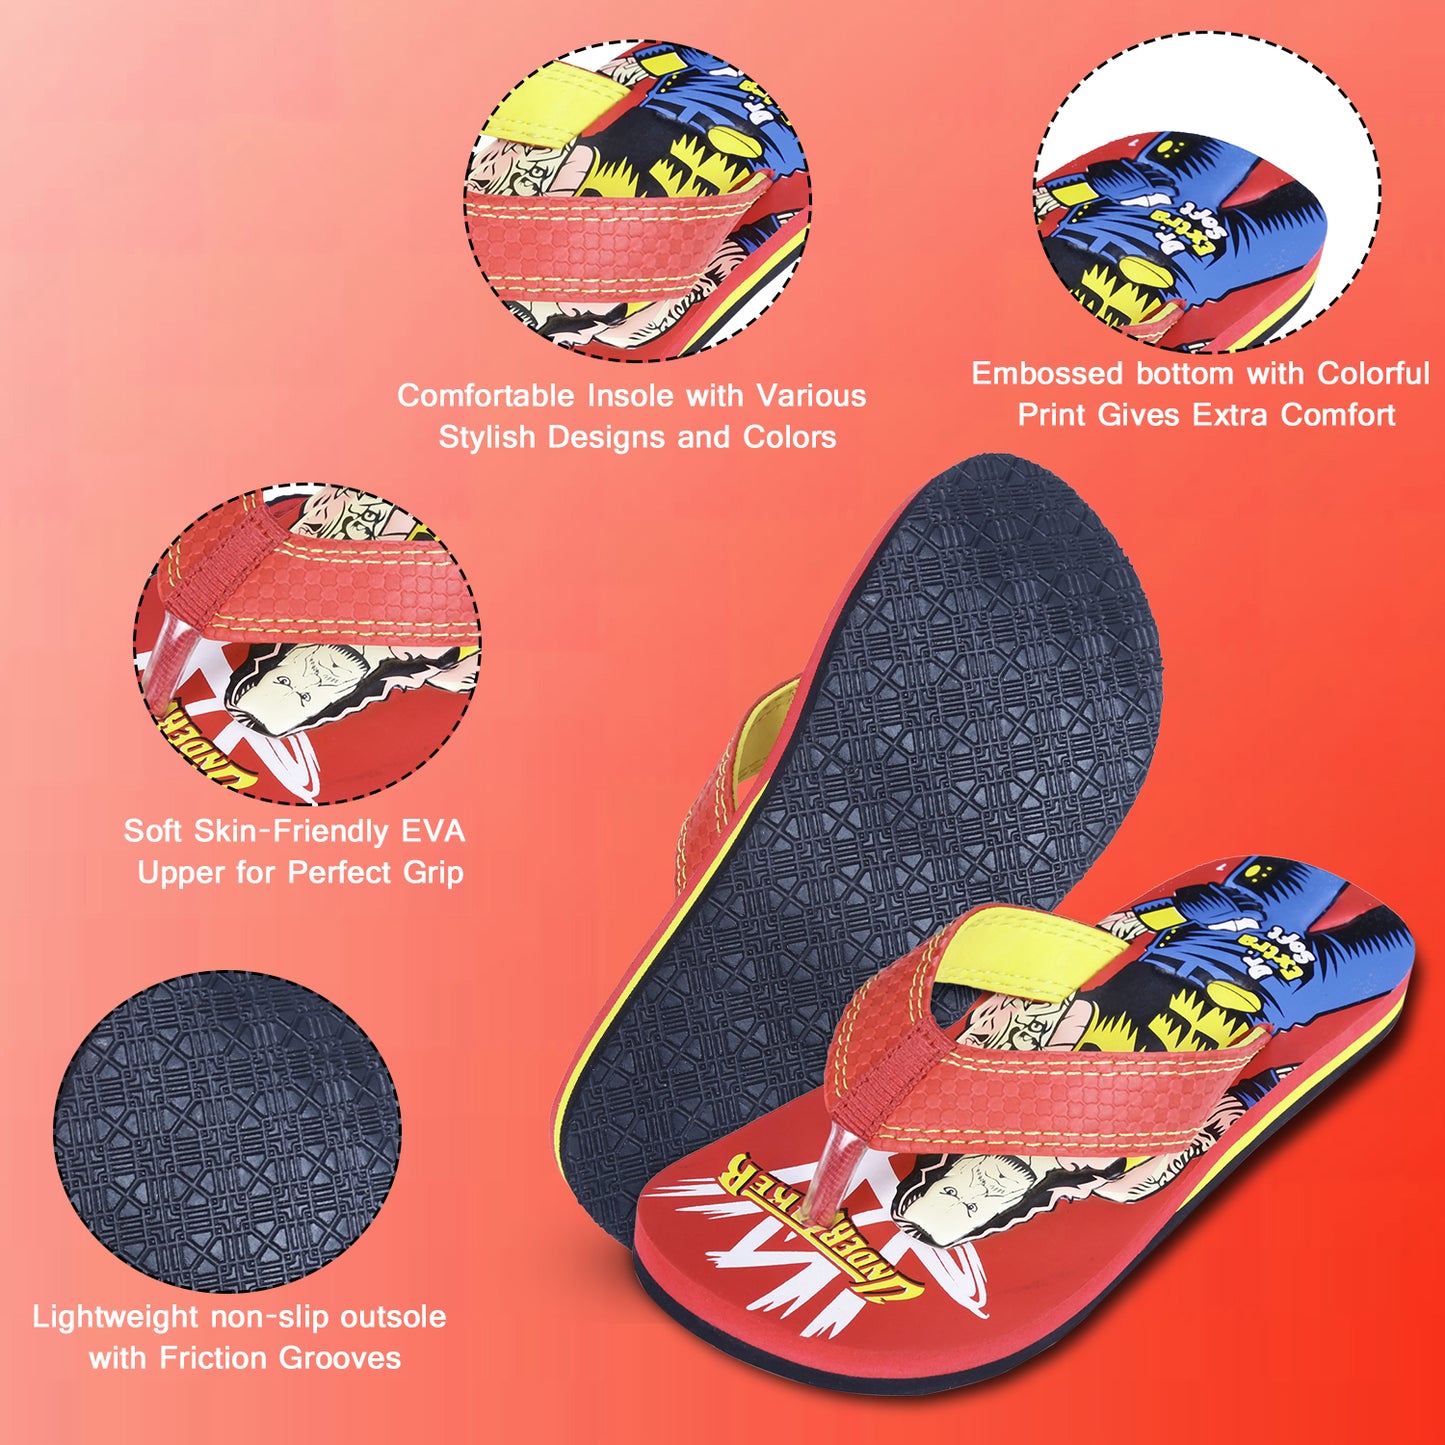 DOCTOR EXTRA SOFT Unisex-Child Kids Flip-Flop (Undertaker Print) Soft Comfortable Indoor & Outdoor Slippers Stylish Non-Slip Slide Home Casual Cool Cartoon Cute House Chappals For Boys & Girls